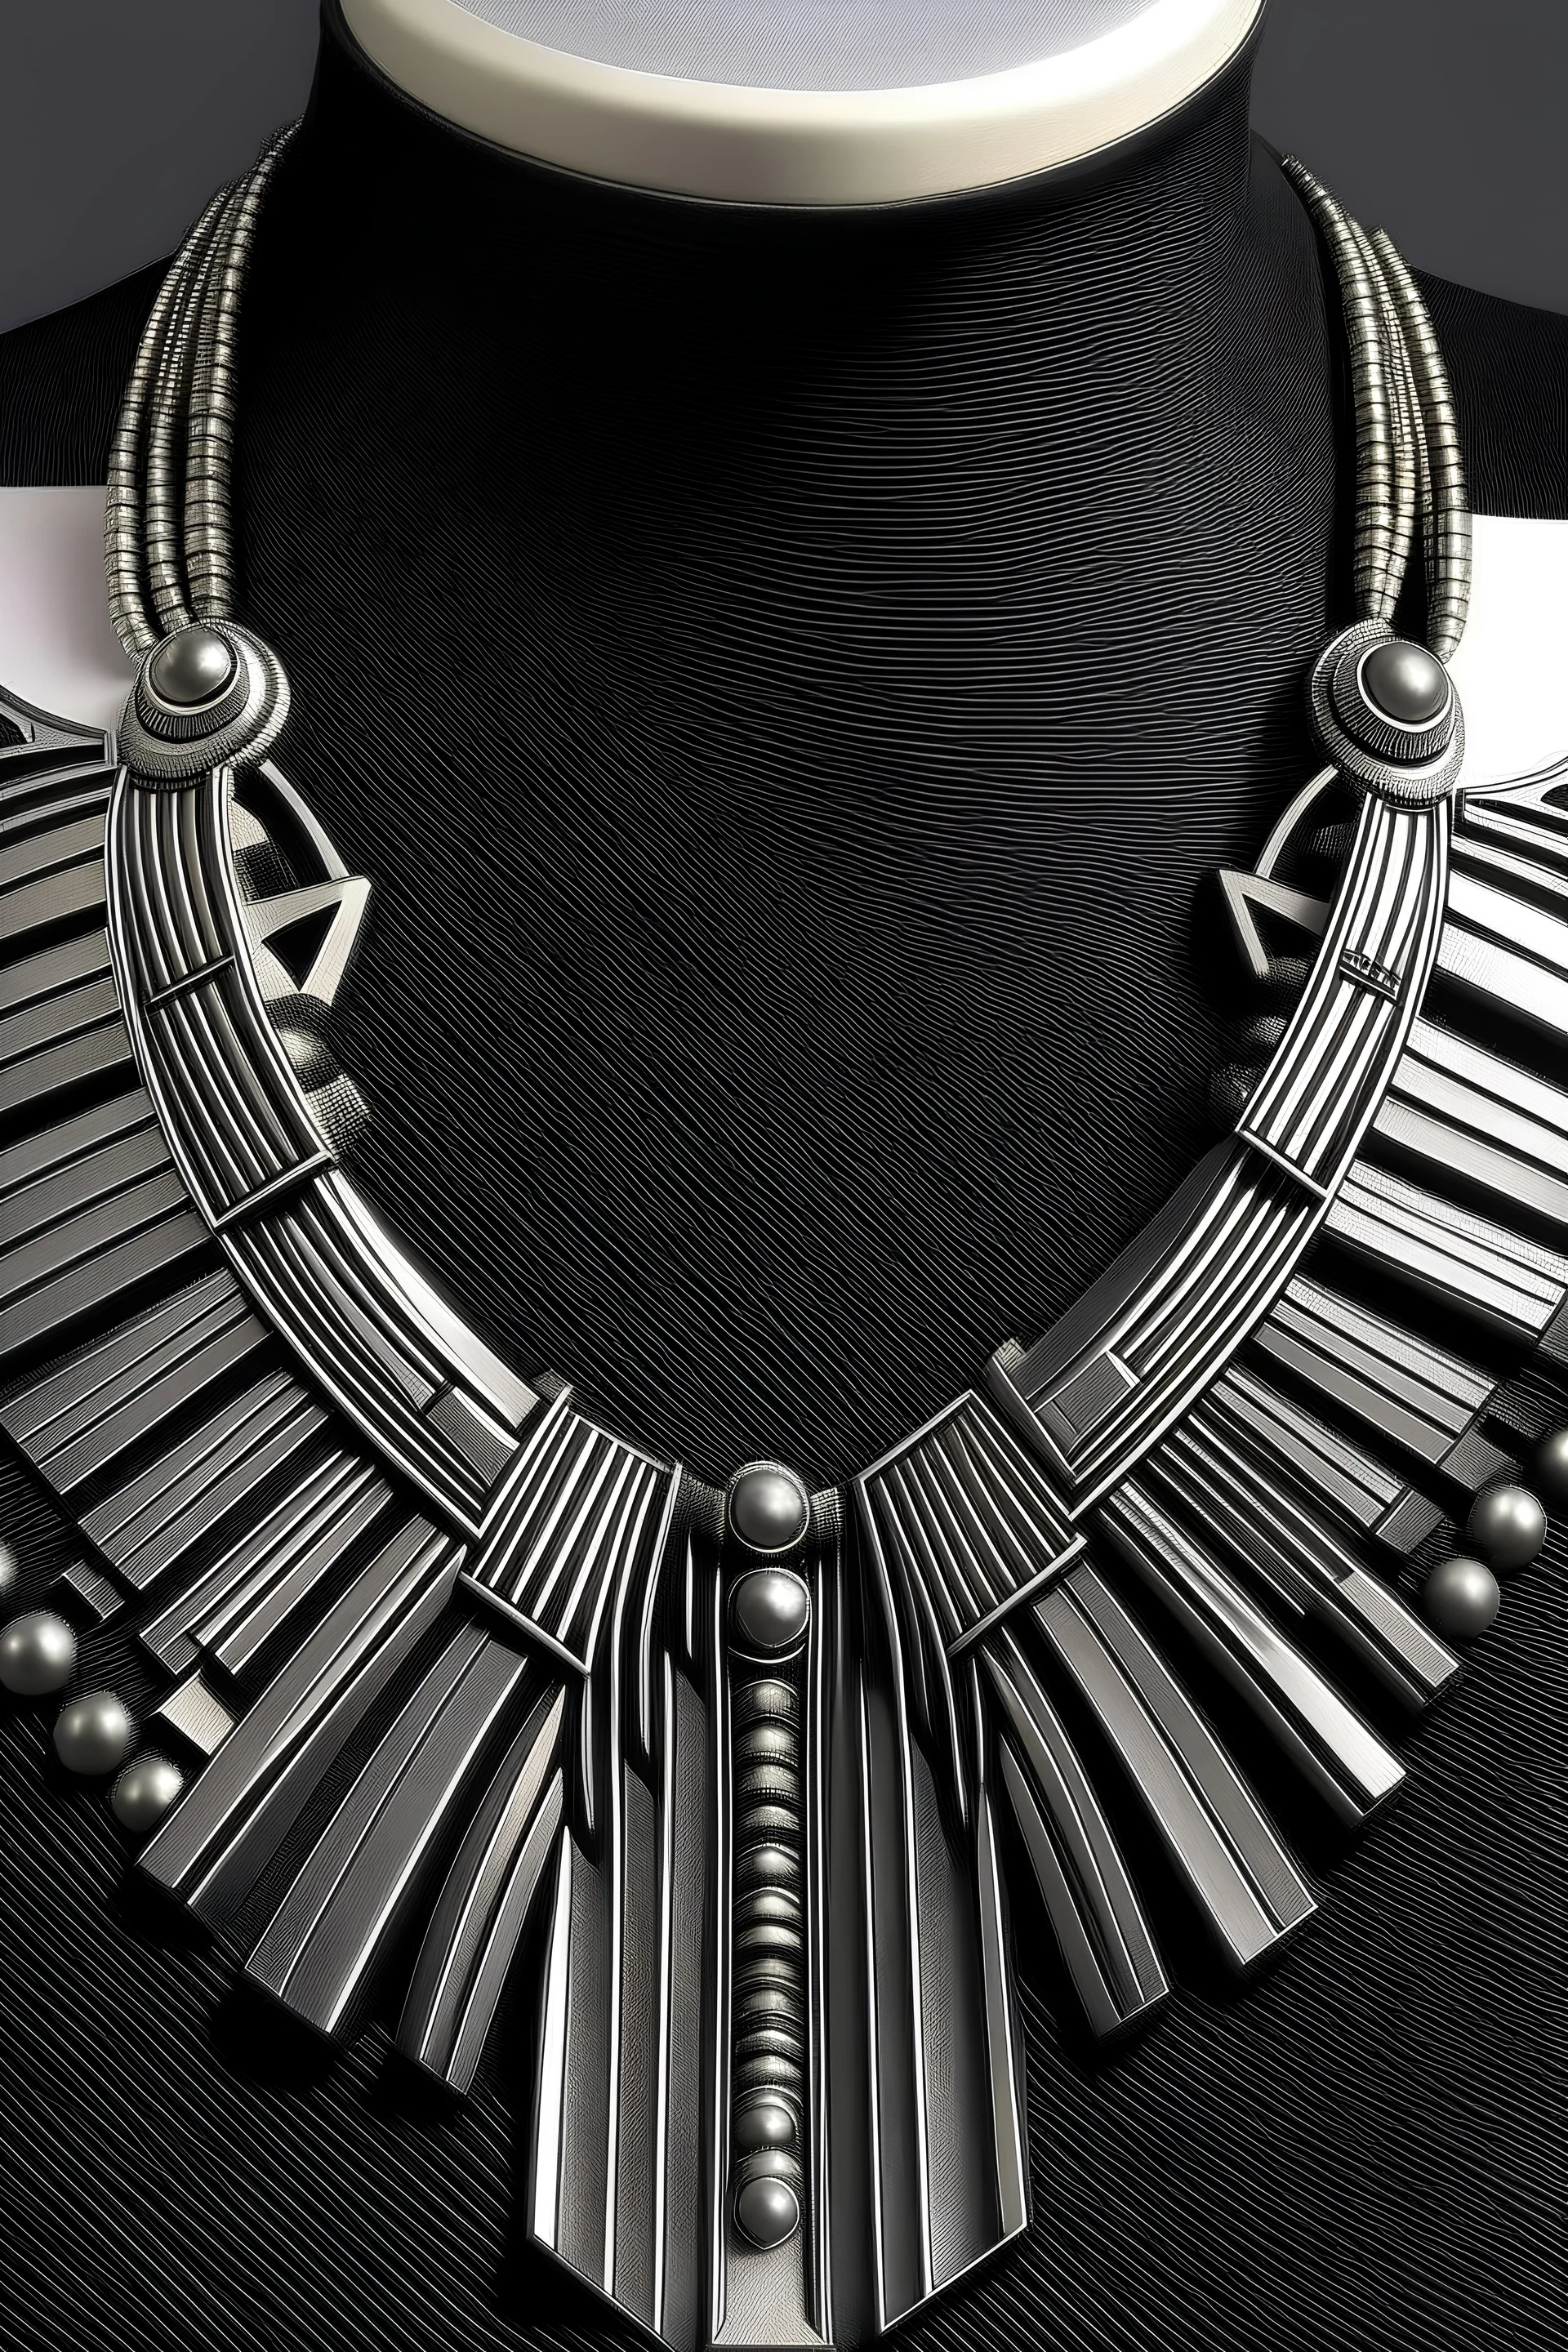 Create a contemporary modern necklace using motifs from art deco era make it creative and different but actually wearable and realistic